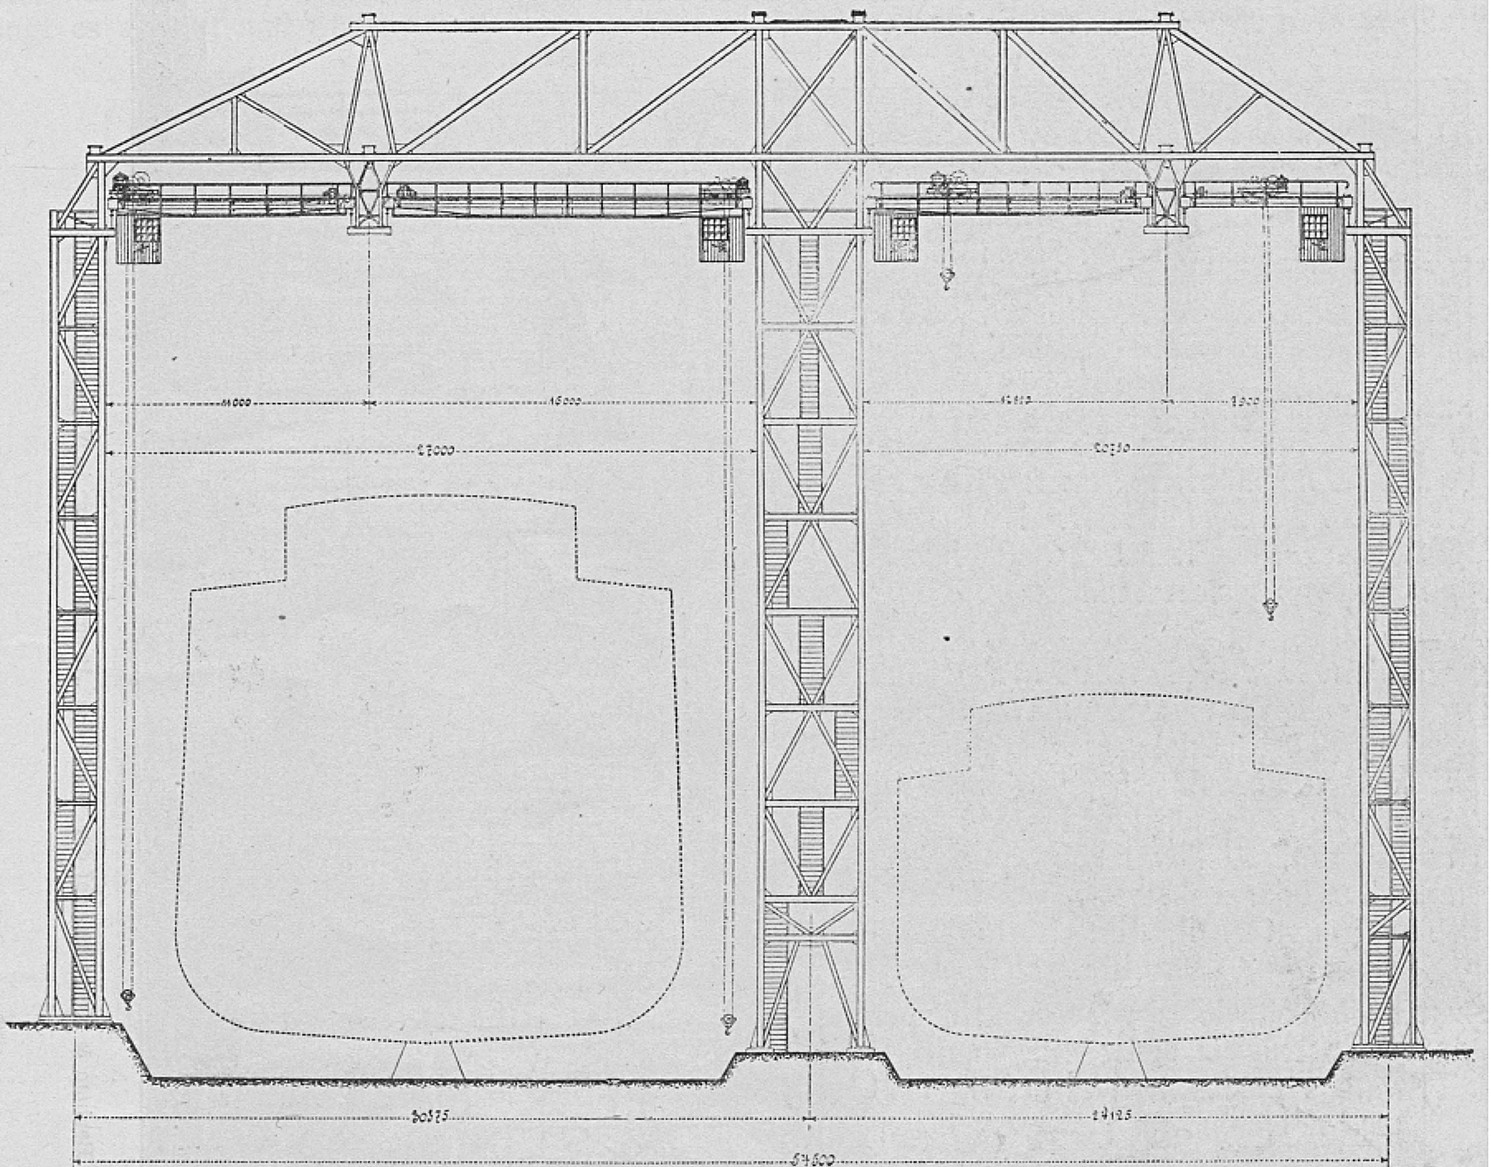 Cross section drawing of the slipways of AG Vulcan Stettin shipyard, Germany, date unknown